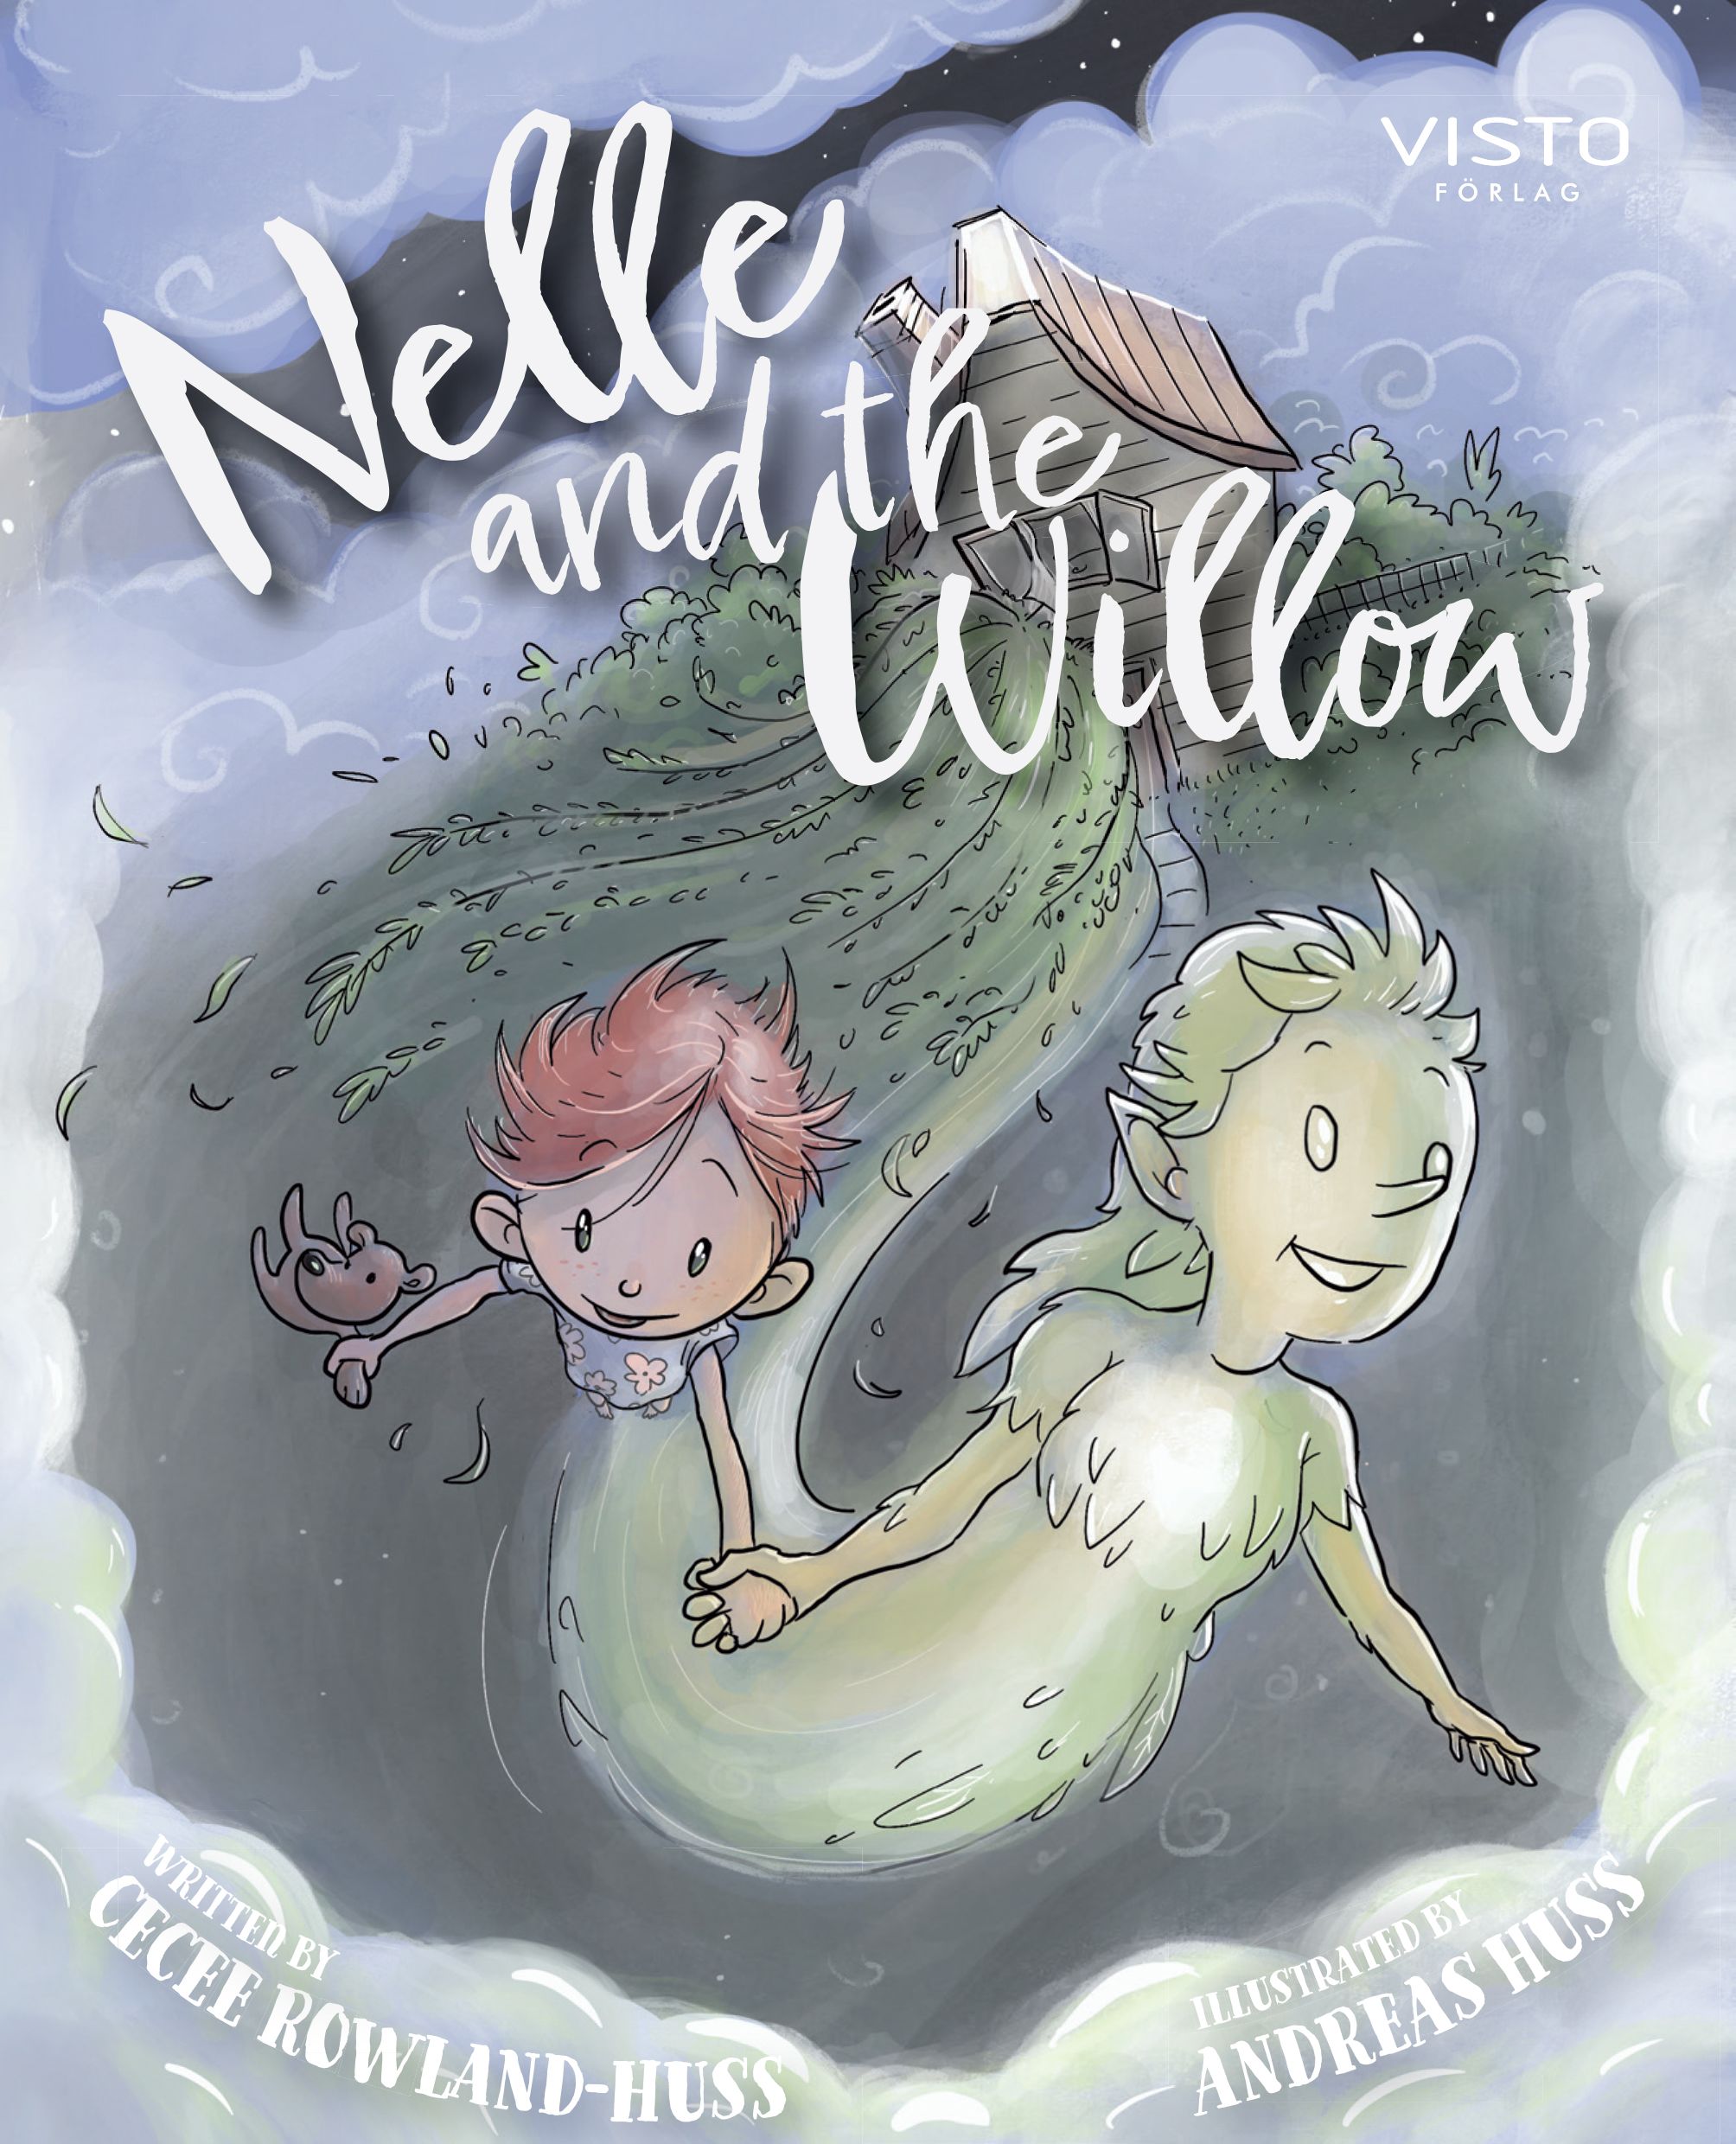 Nelle and the Willow, eBook by Cecee Rowland-Huss